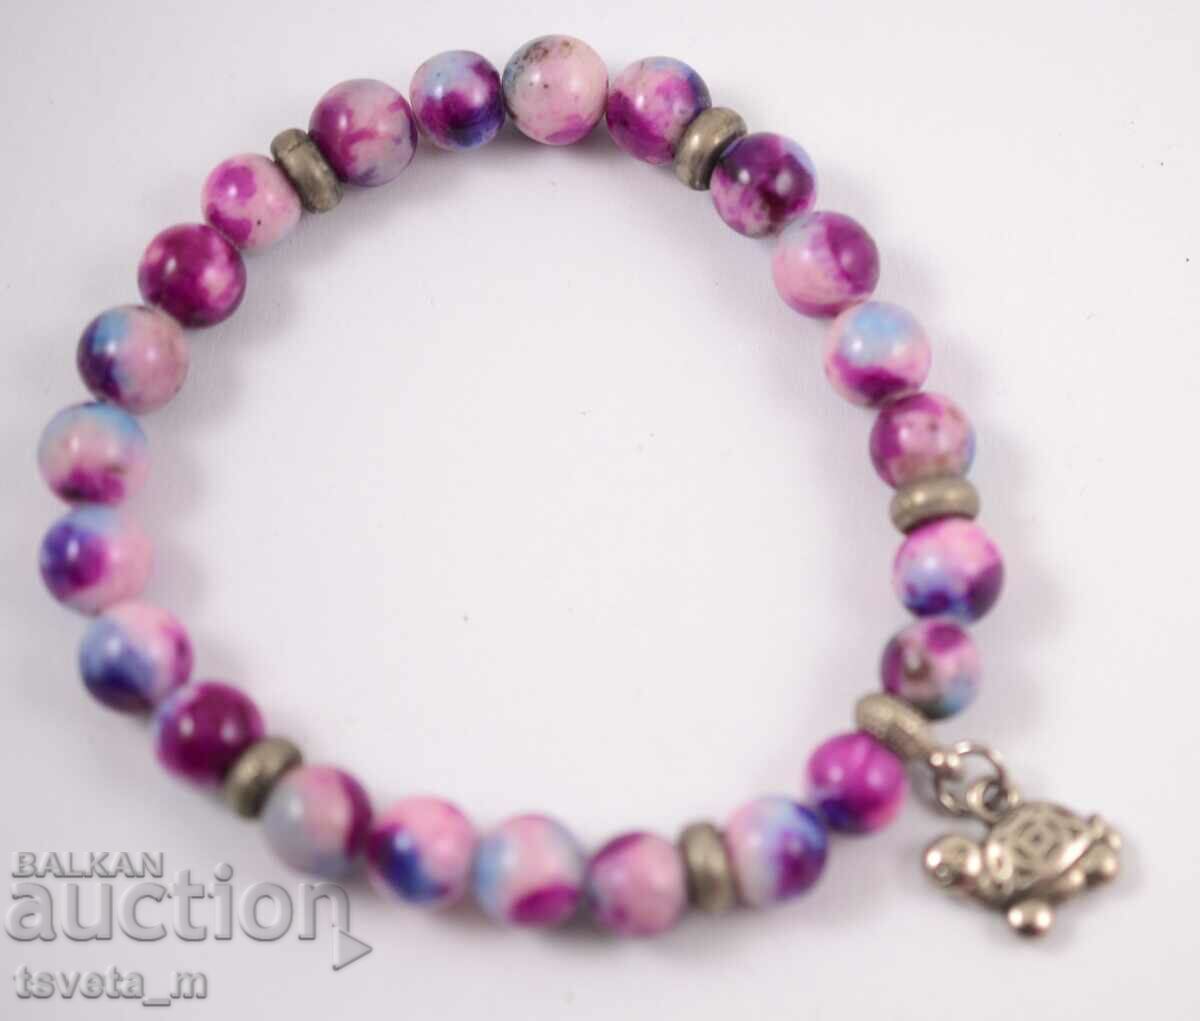 Bracelet with natural stones